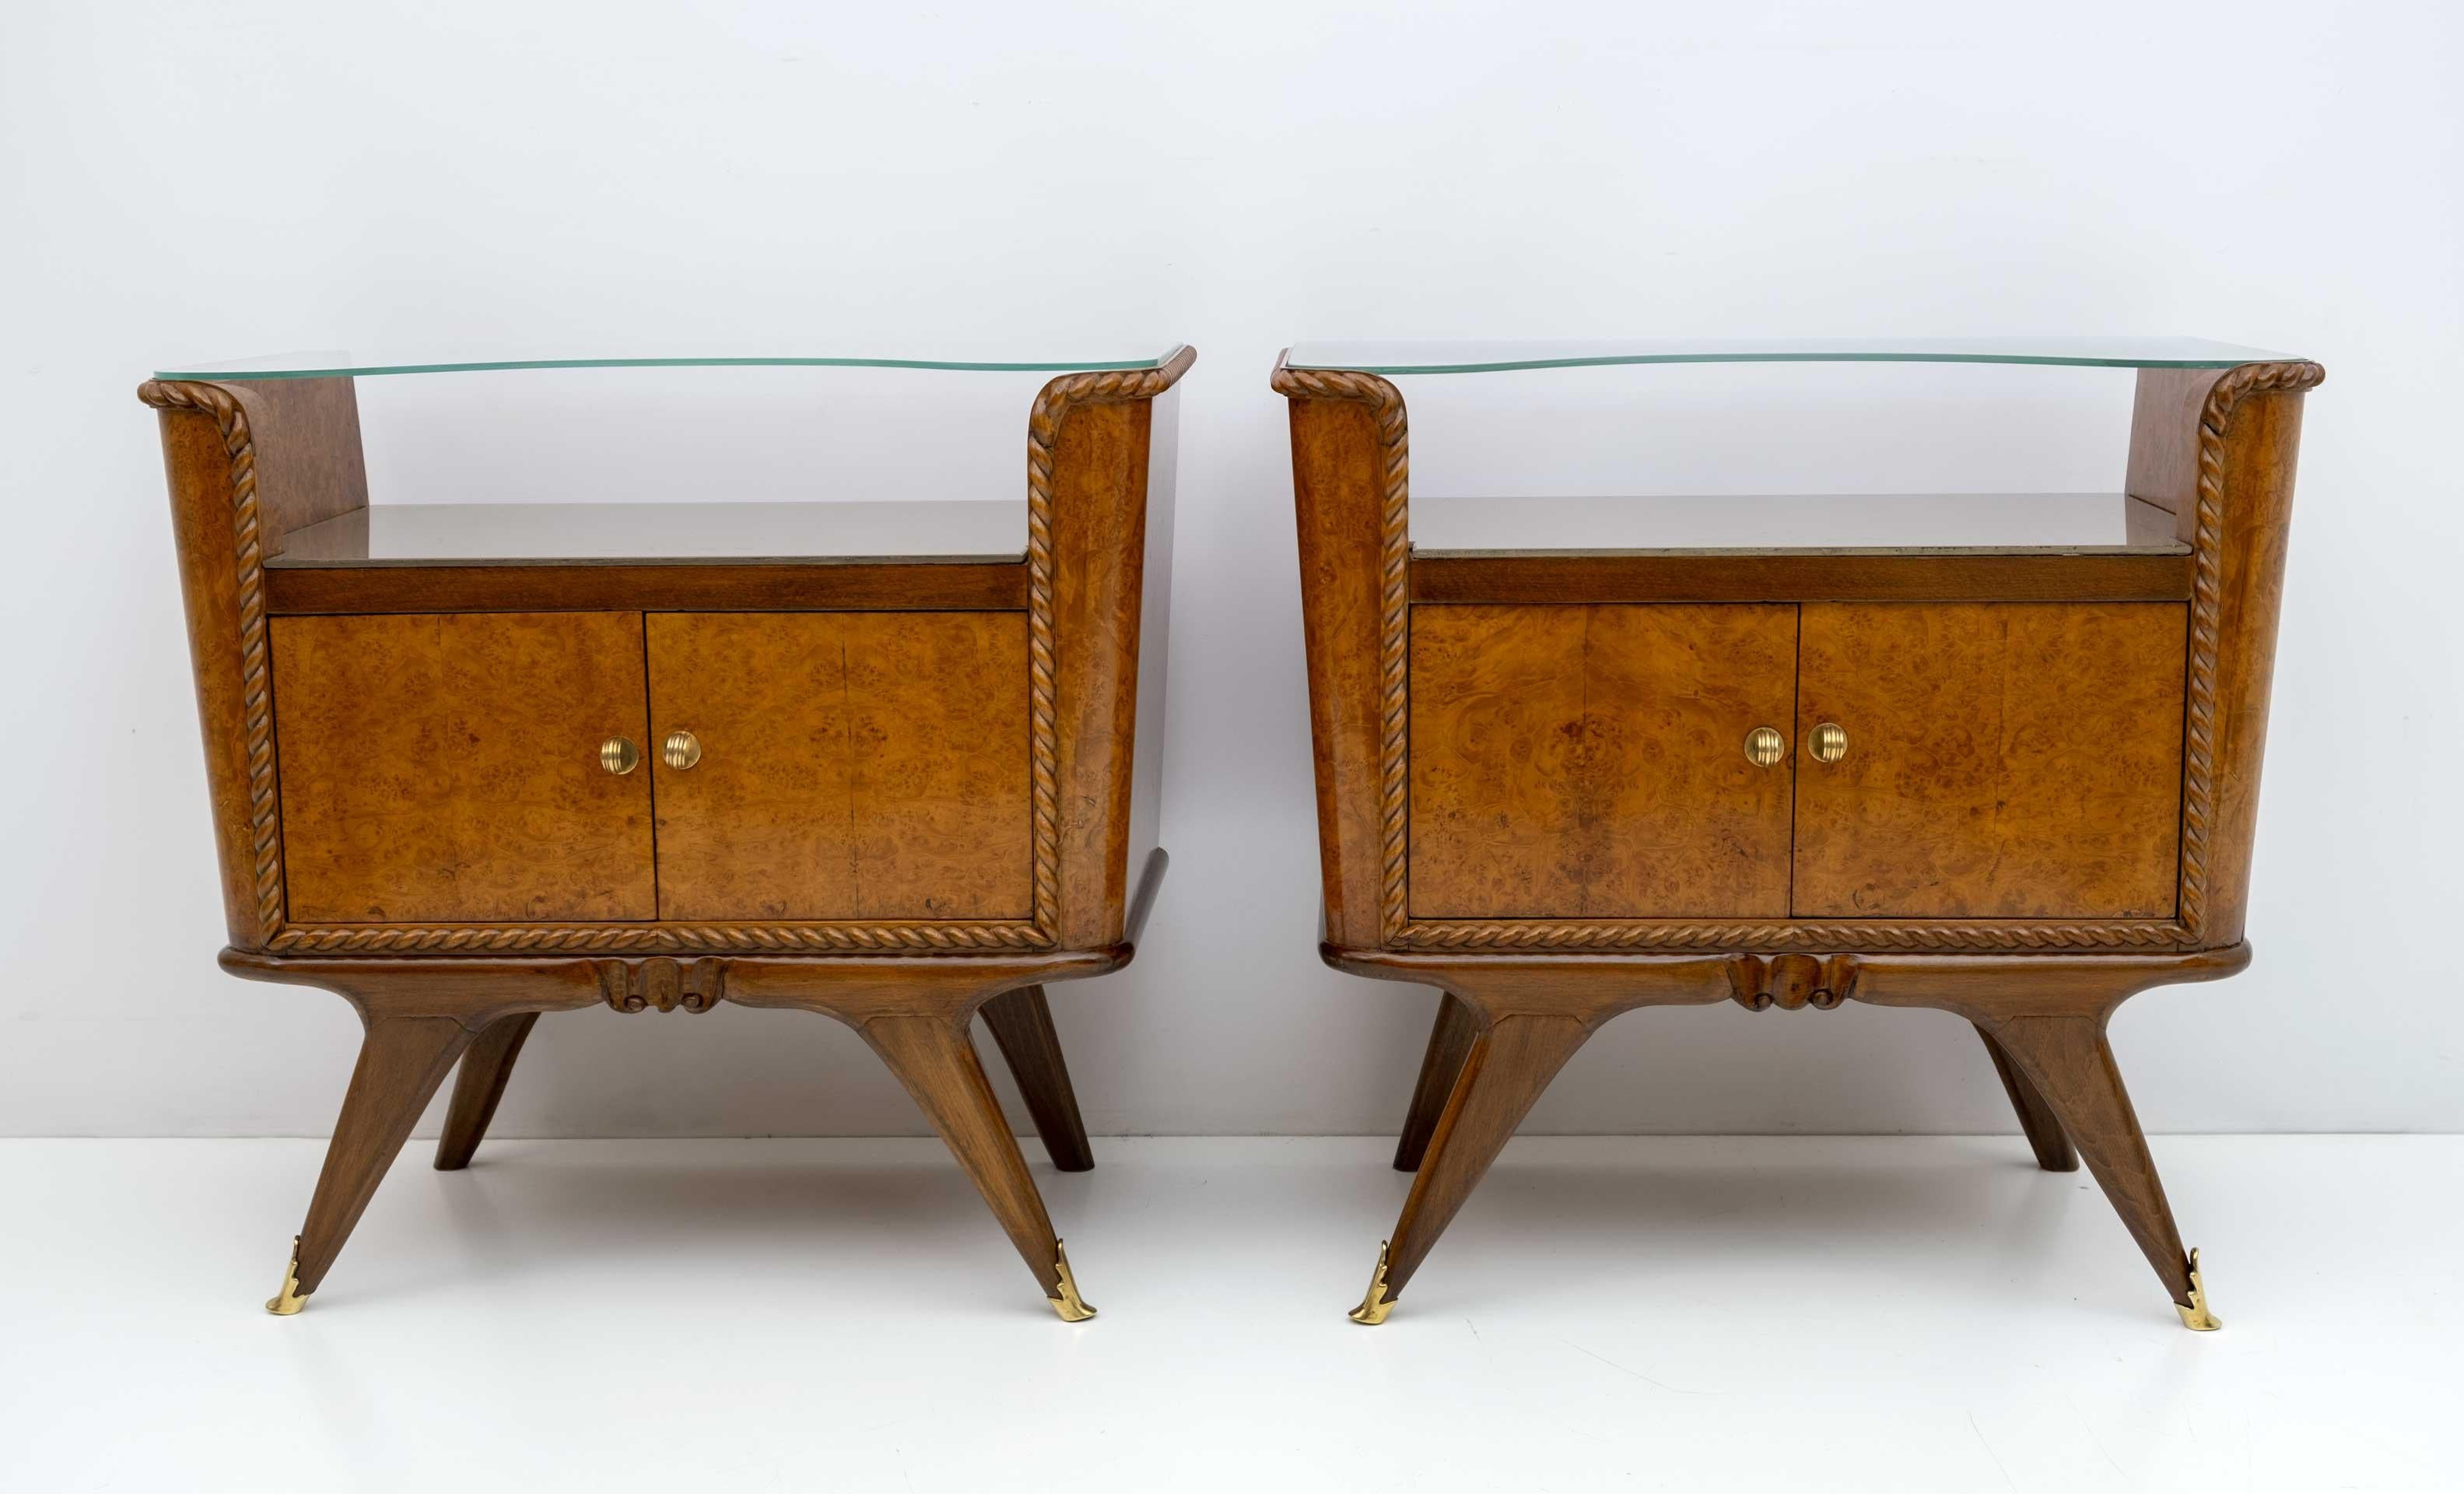 Pair of Italian-made bedside tables from the 1930s, in the Art Dèco style, in walnut with structure in beech wood and external covering in burr walnut, shelves in original glass with decorations, conical-shaped feet with the typical design of those